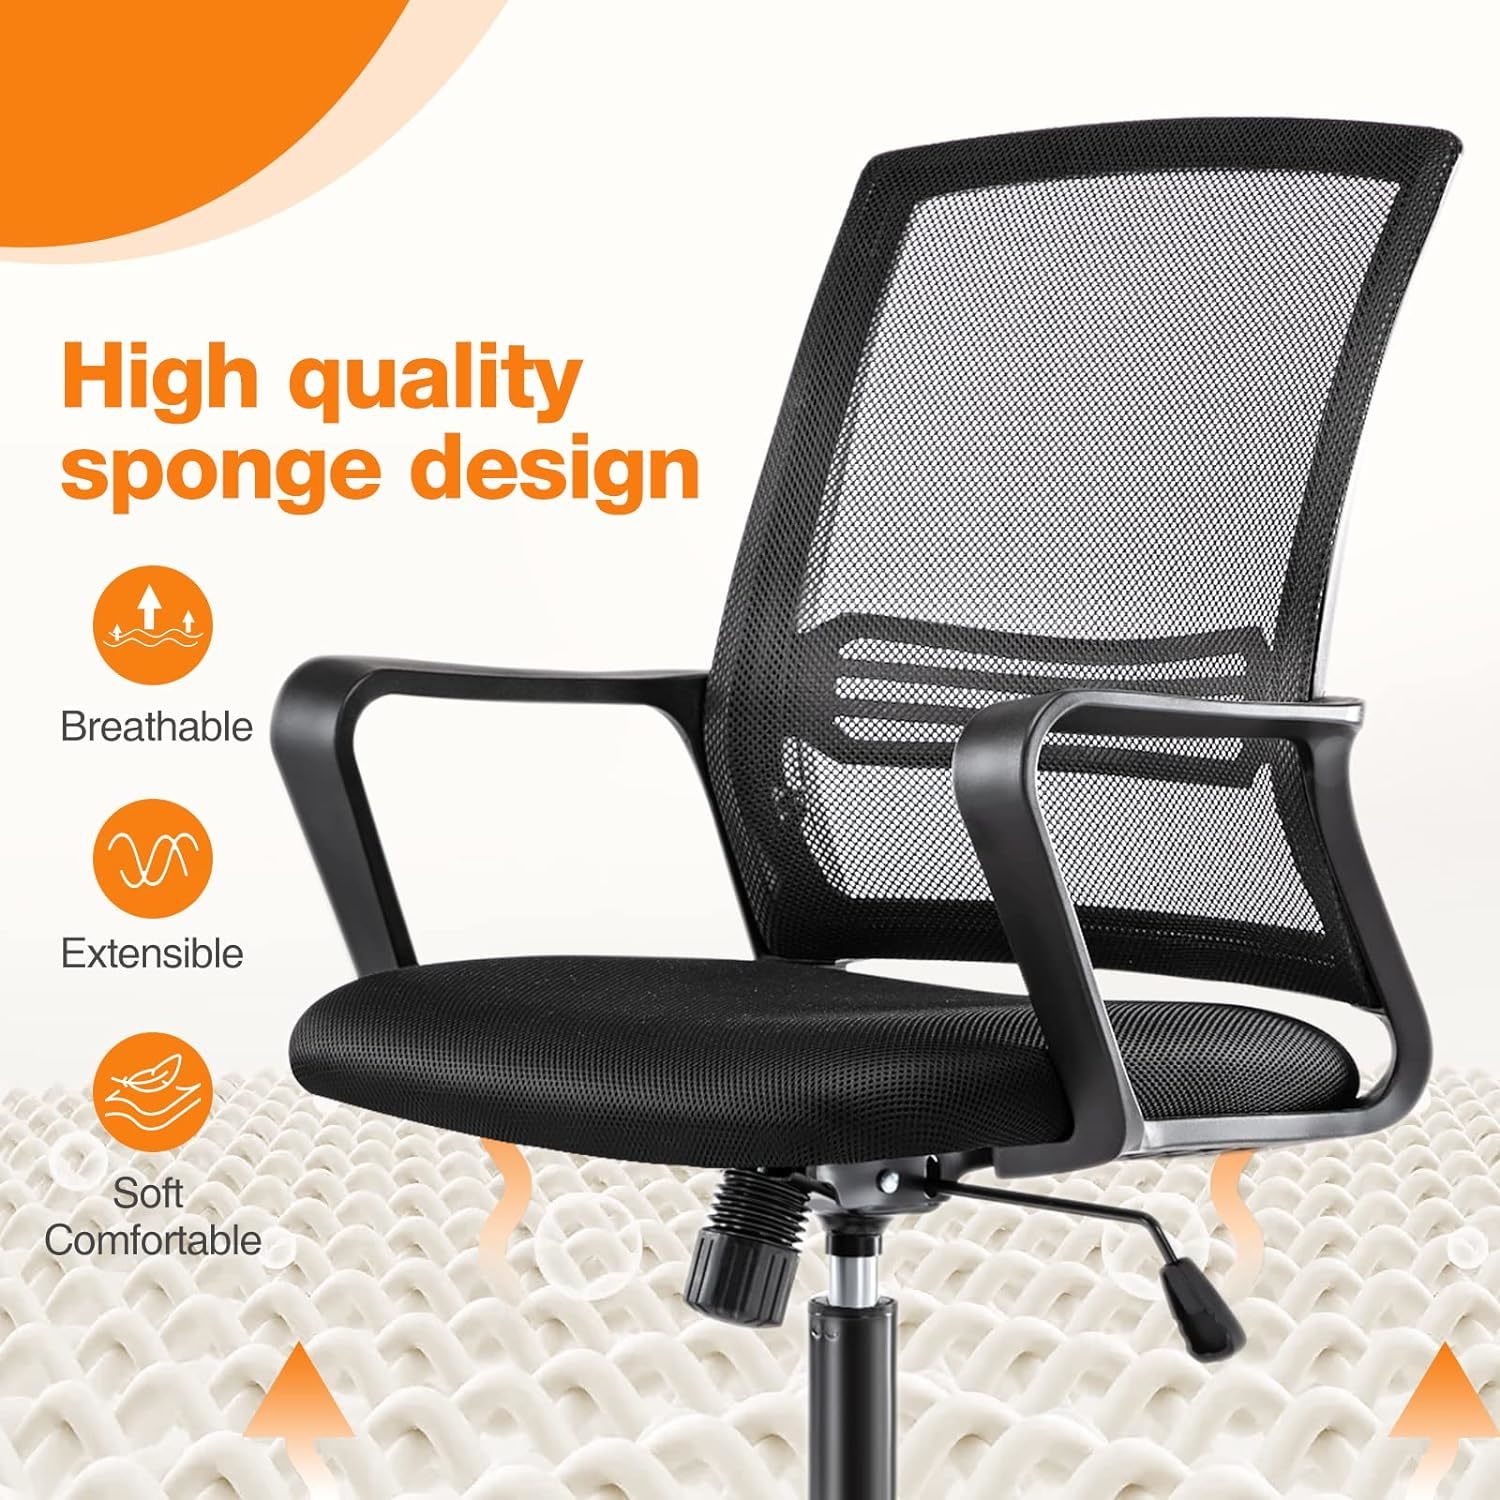 JHK Ergonomic Office Home Desk Mesh Fixed Armrest, Executive Computer Chair  with Soft Foam Seat Cushion and Lumbar Support, Black 